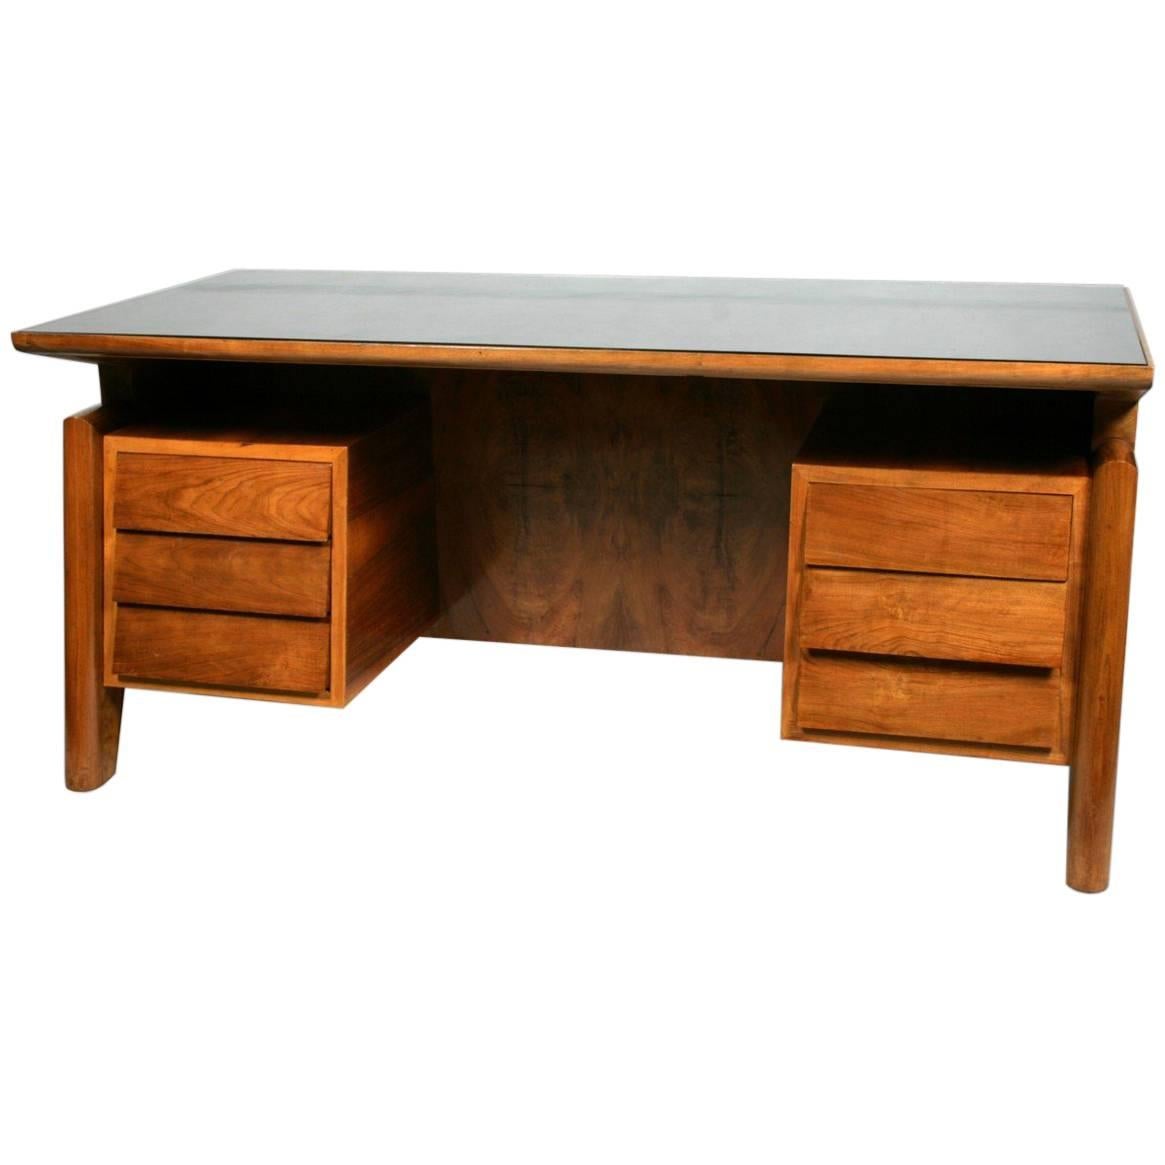 Substantial Walnut Desk Attributed to Carlo di Carli For Sale